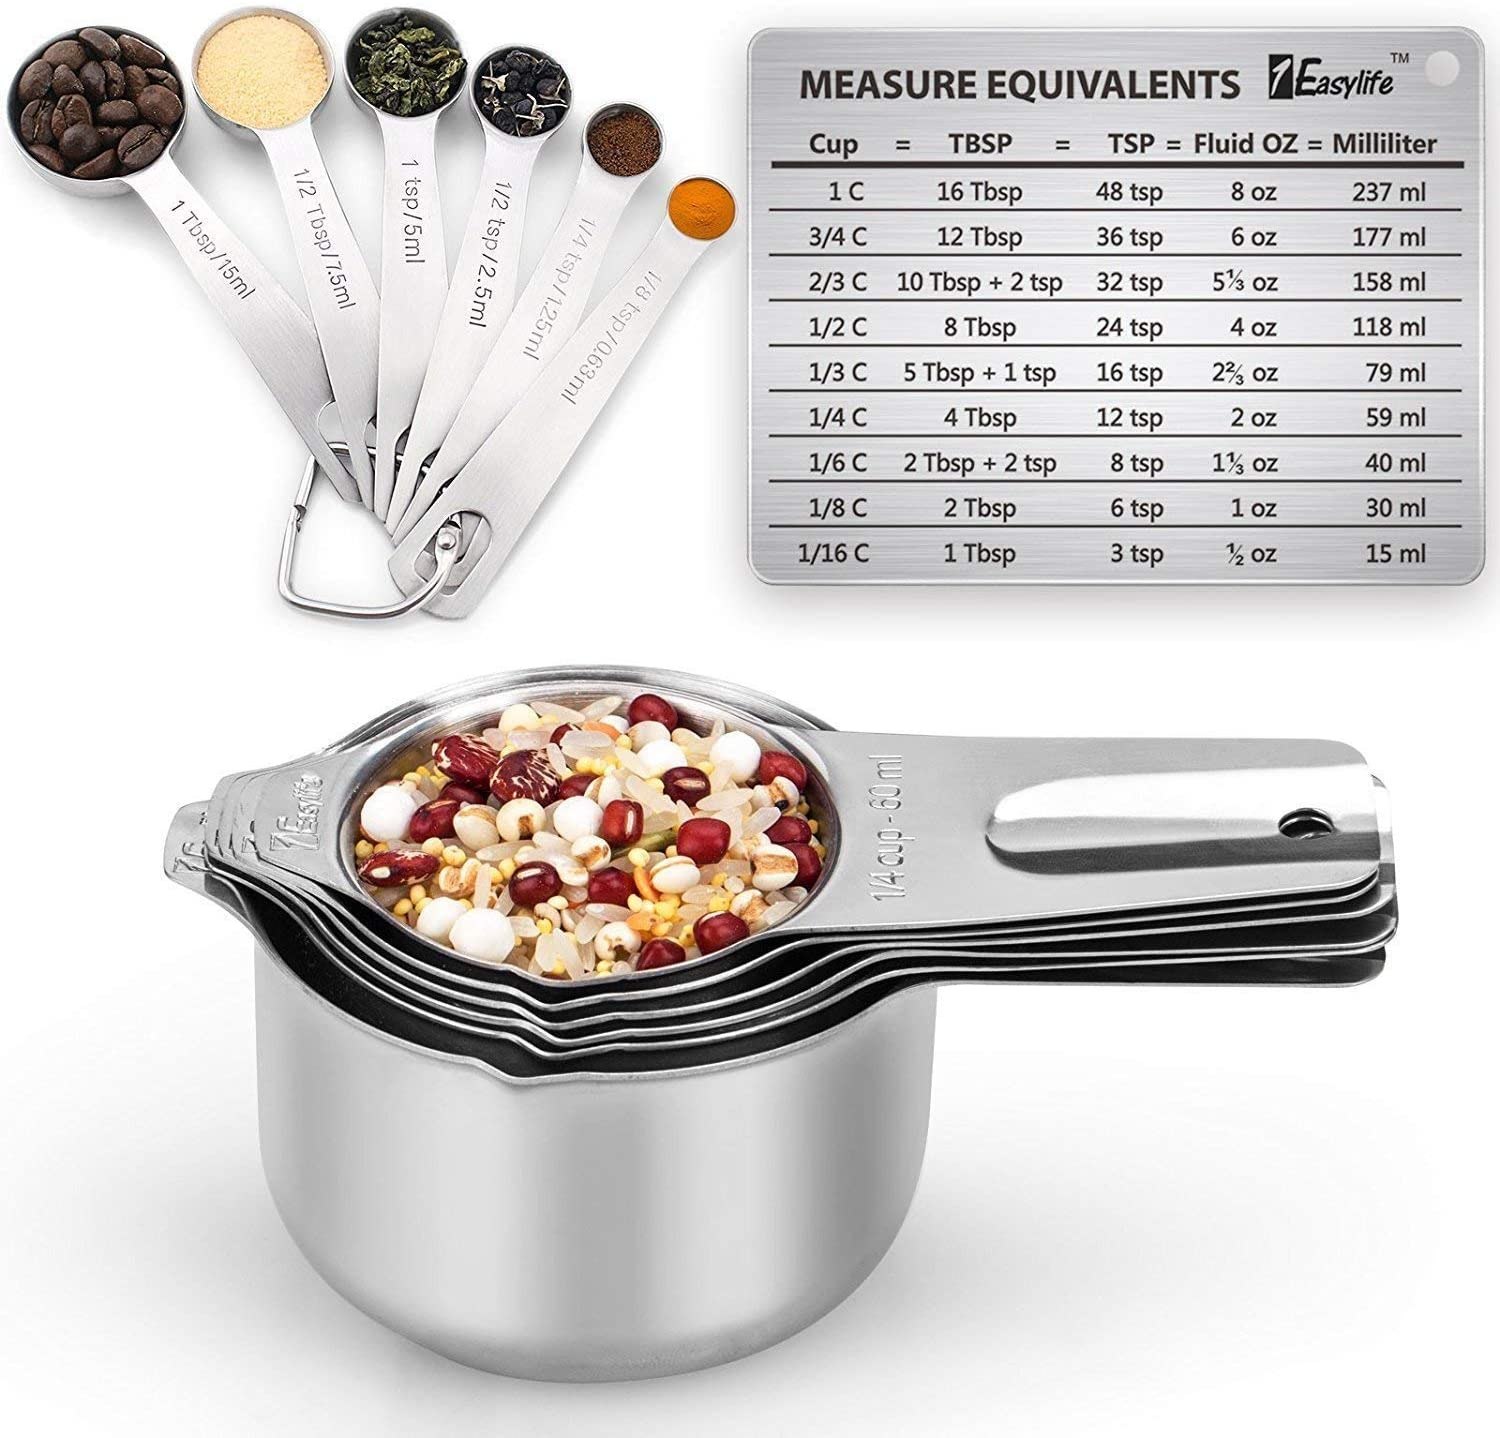 Best measuring cups and spoons? - Page 2 — Big Green Egg Forum